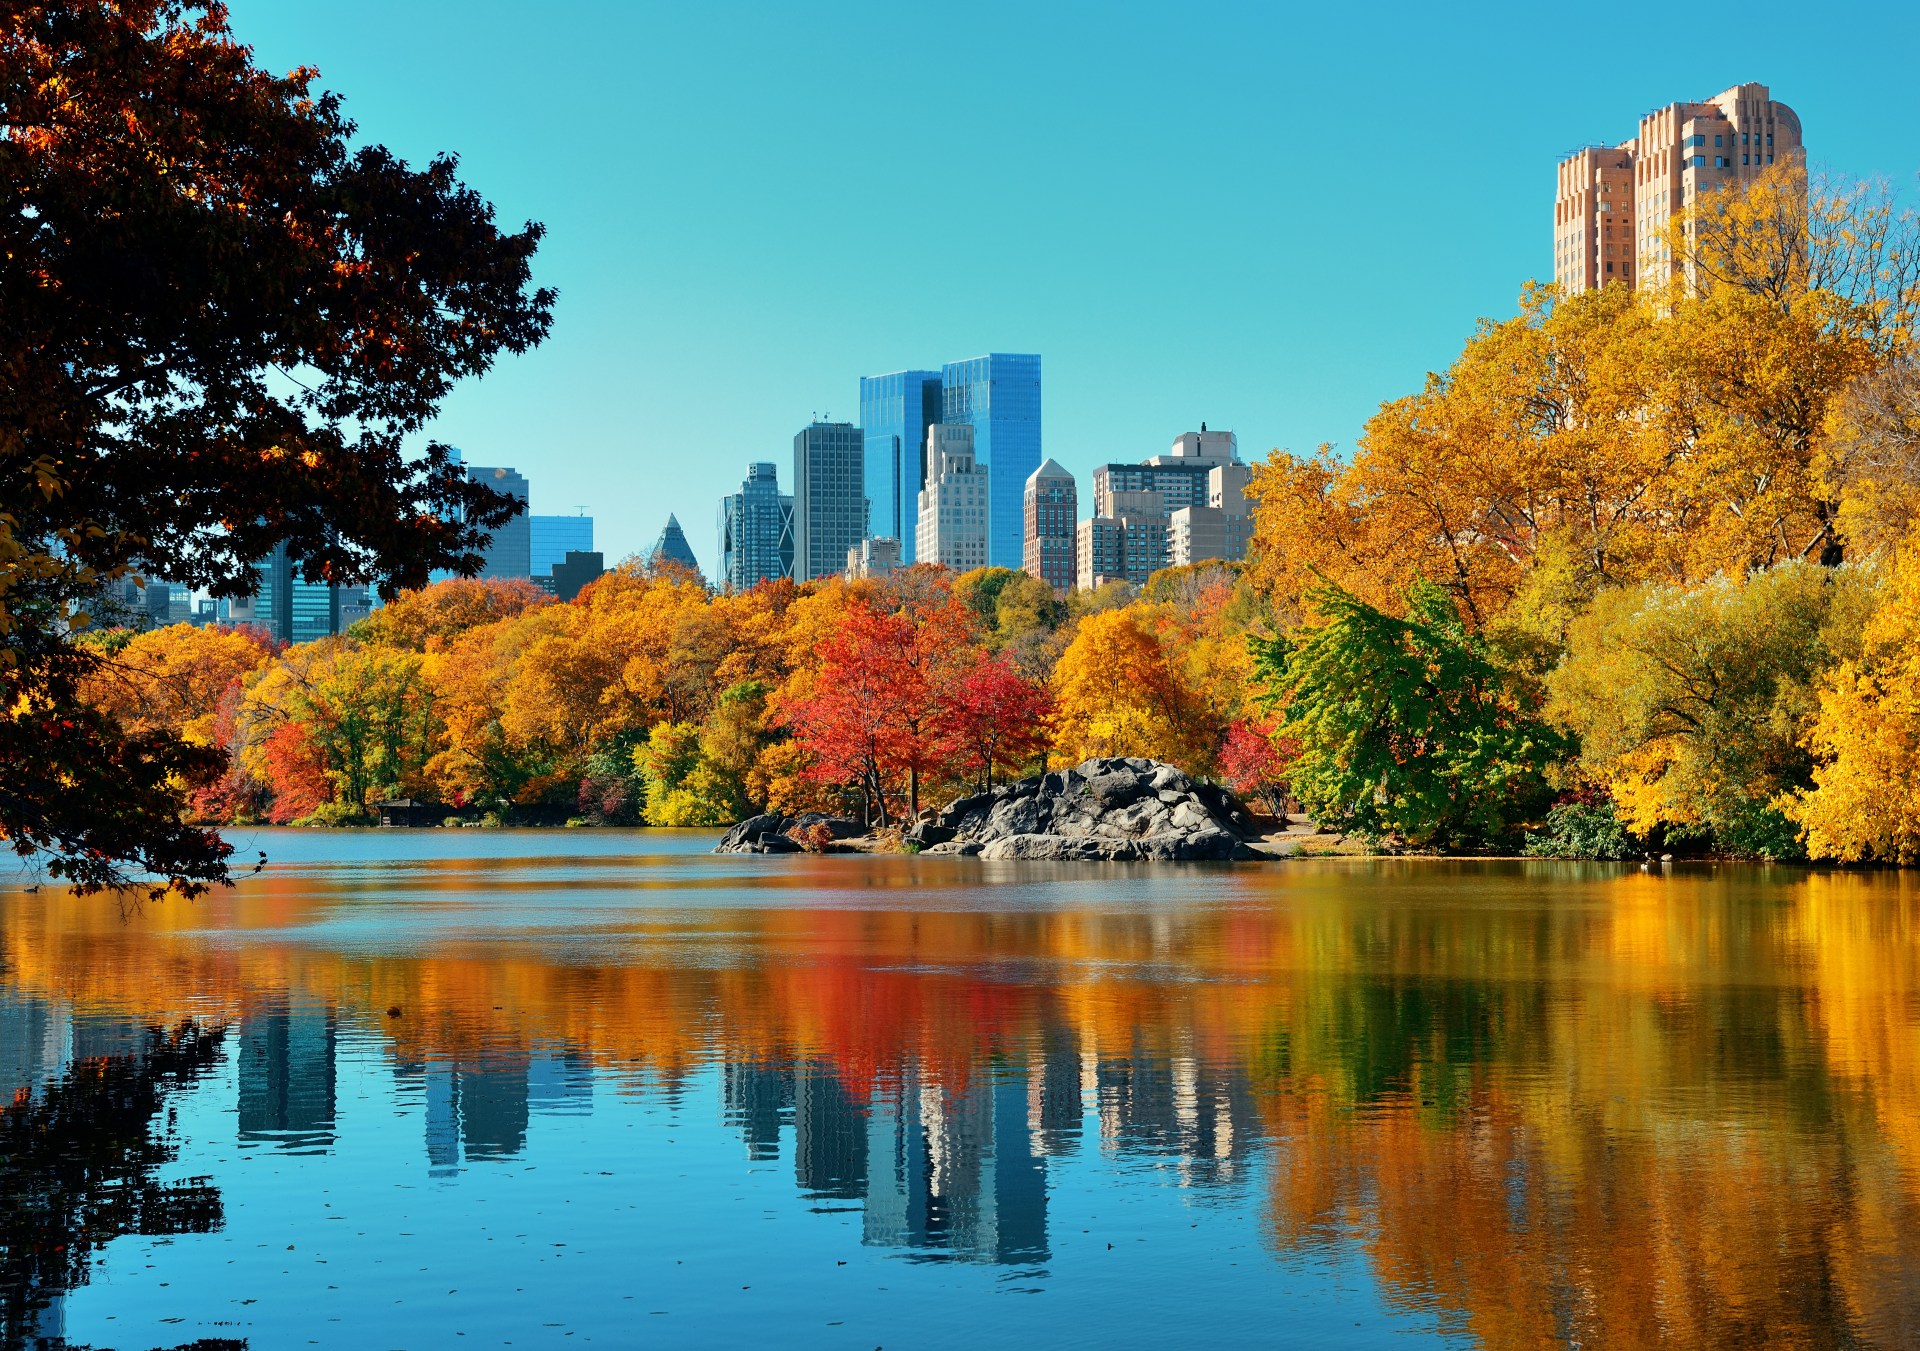 Central,Park,Autumn,And,Buildings,Reflection,In,Midtown,Manhattan,New